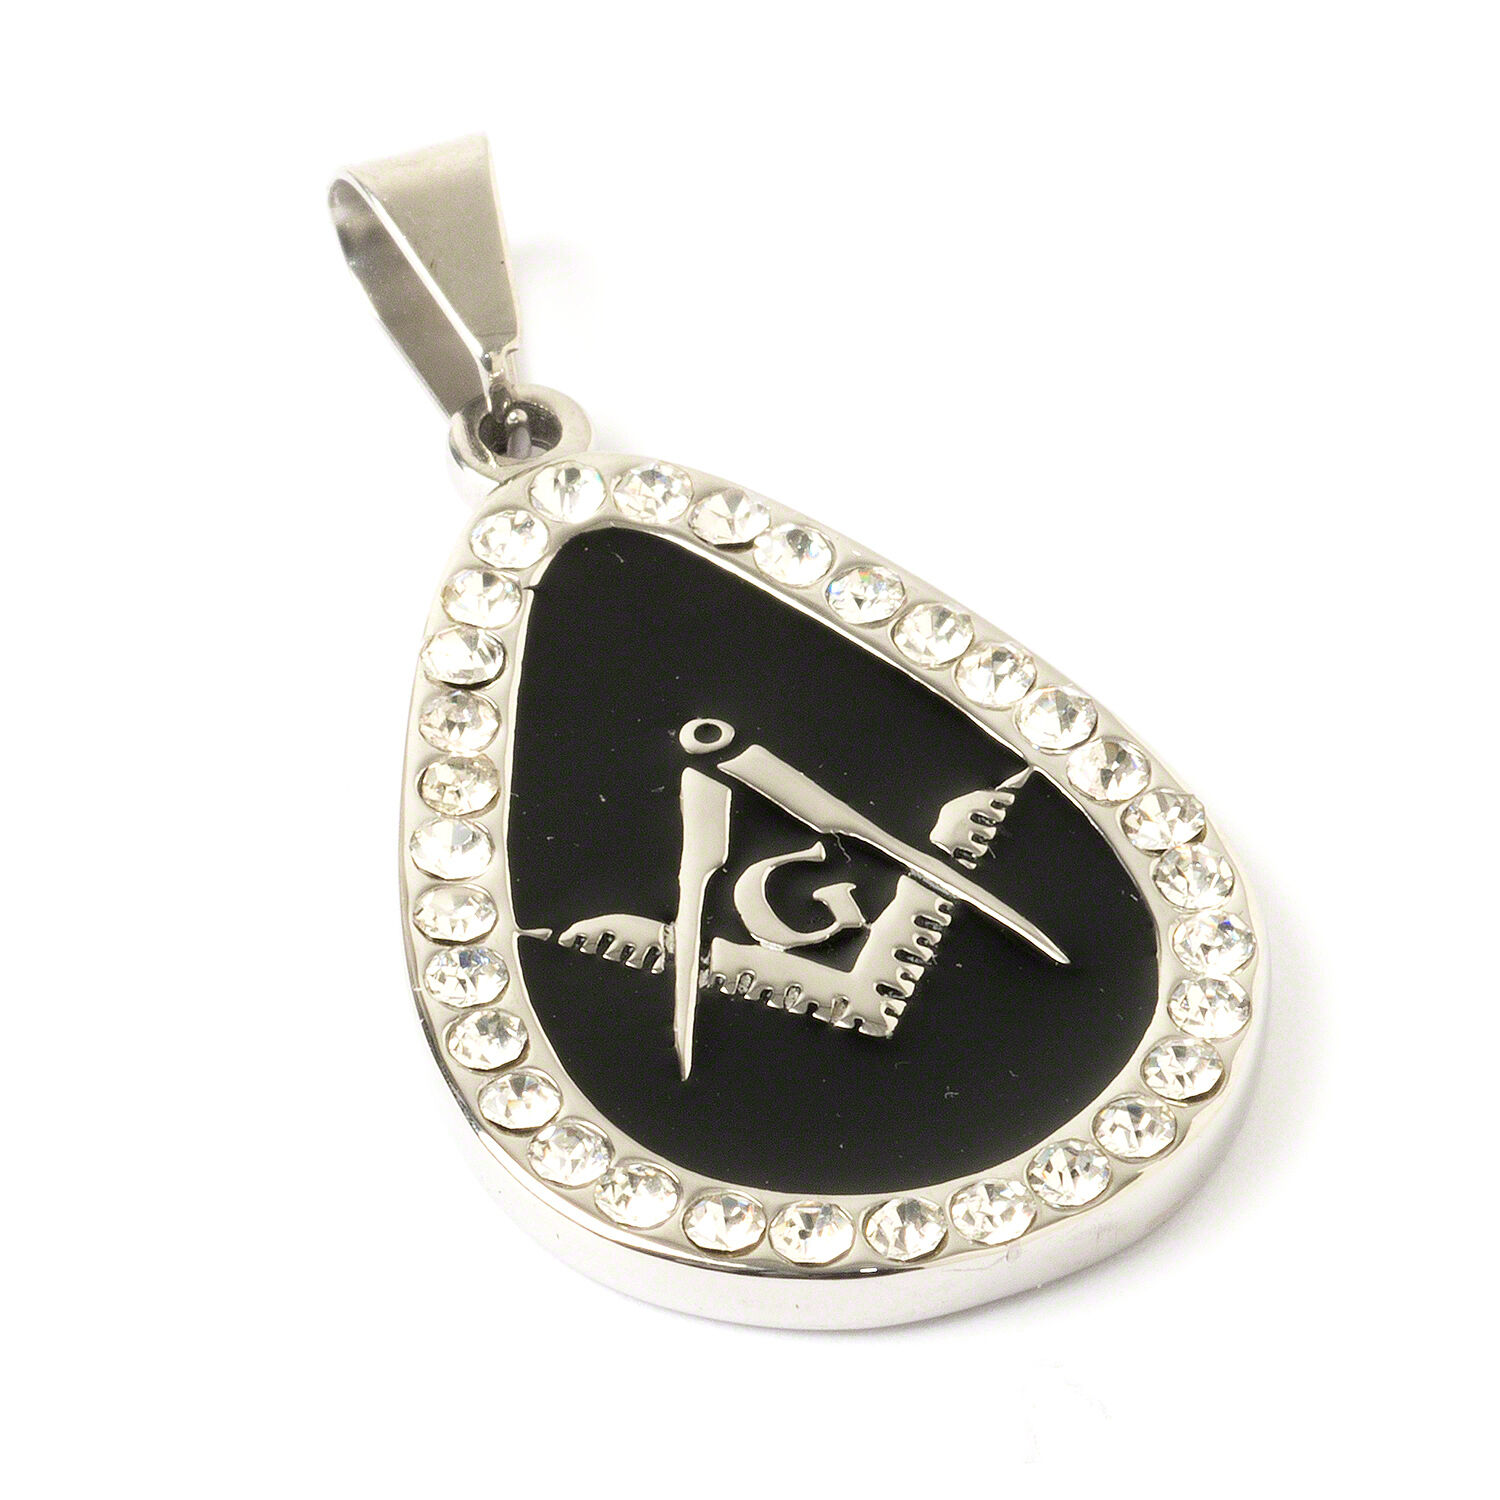 Superb Quality Craft Ladies Gift Masonic silver Pendent Badge enamelled necklace